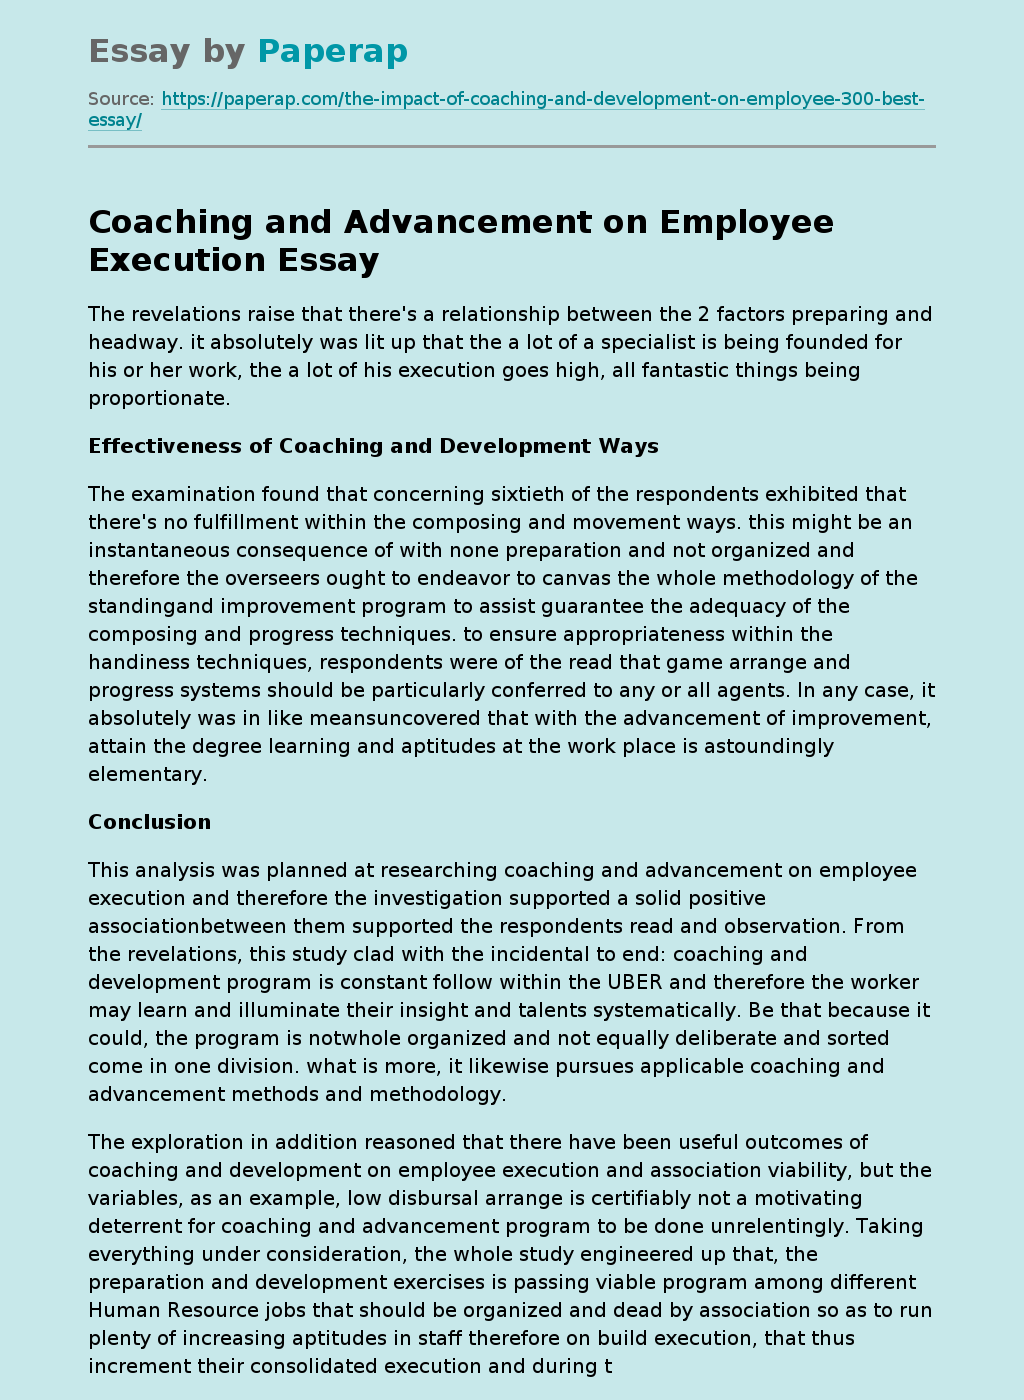 Coaching and Advancement on Employee Execution